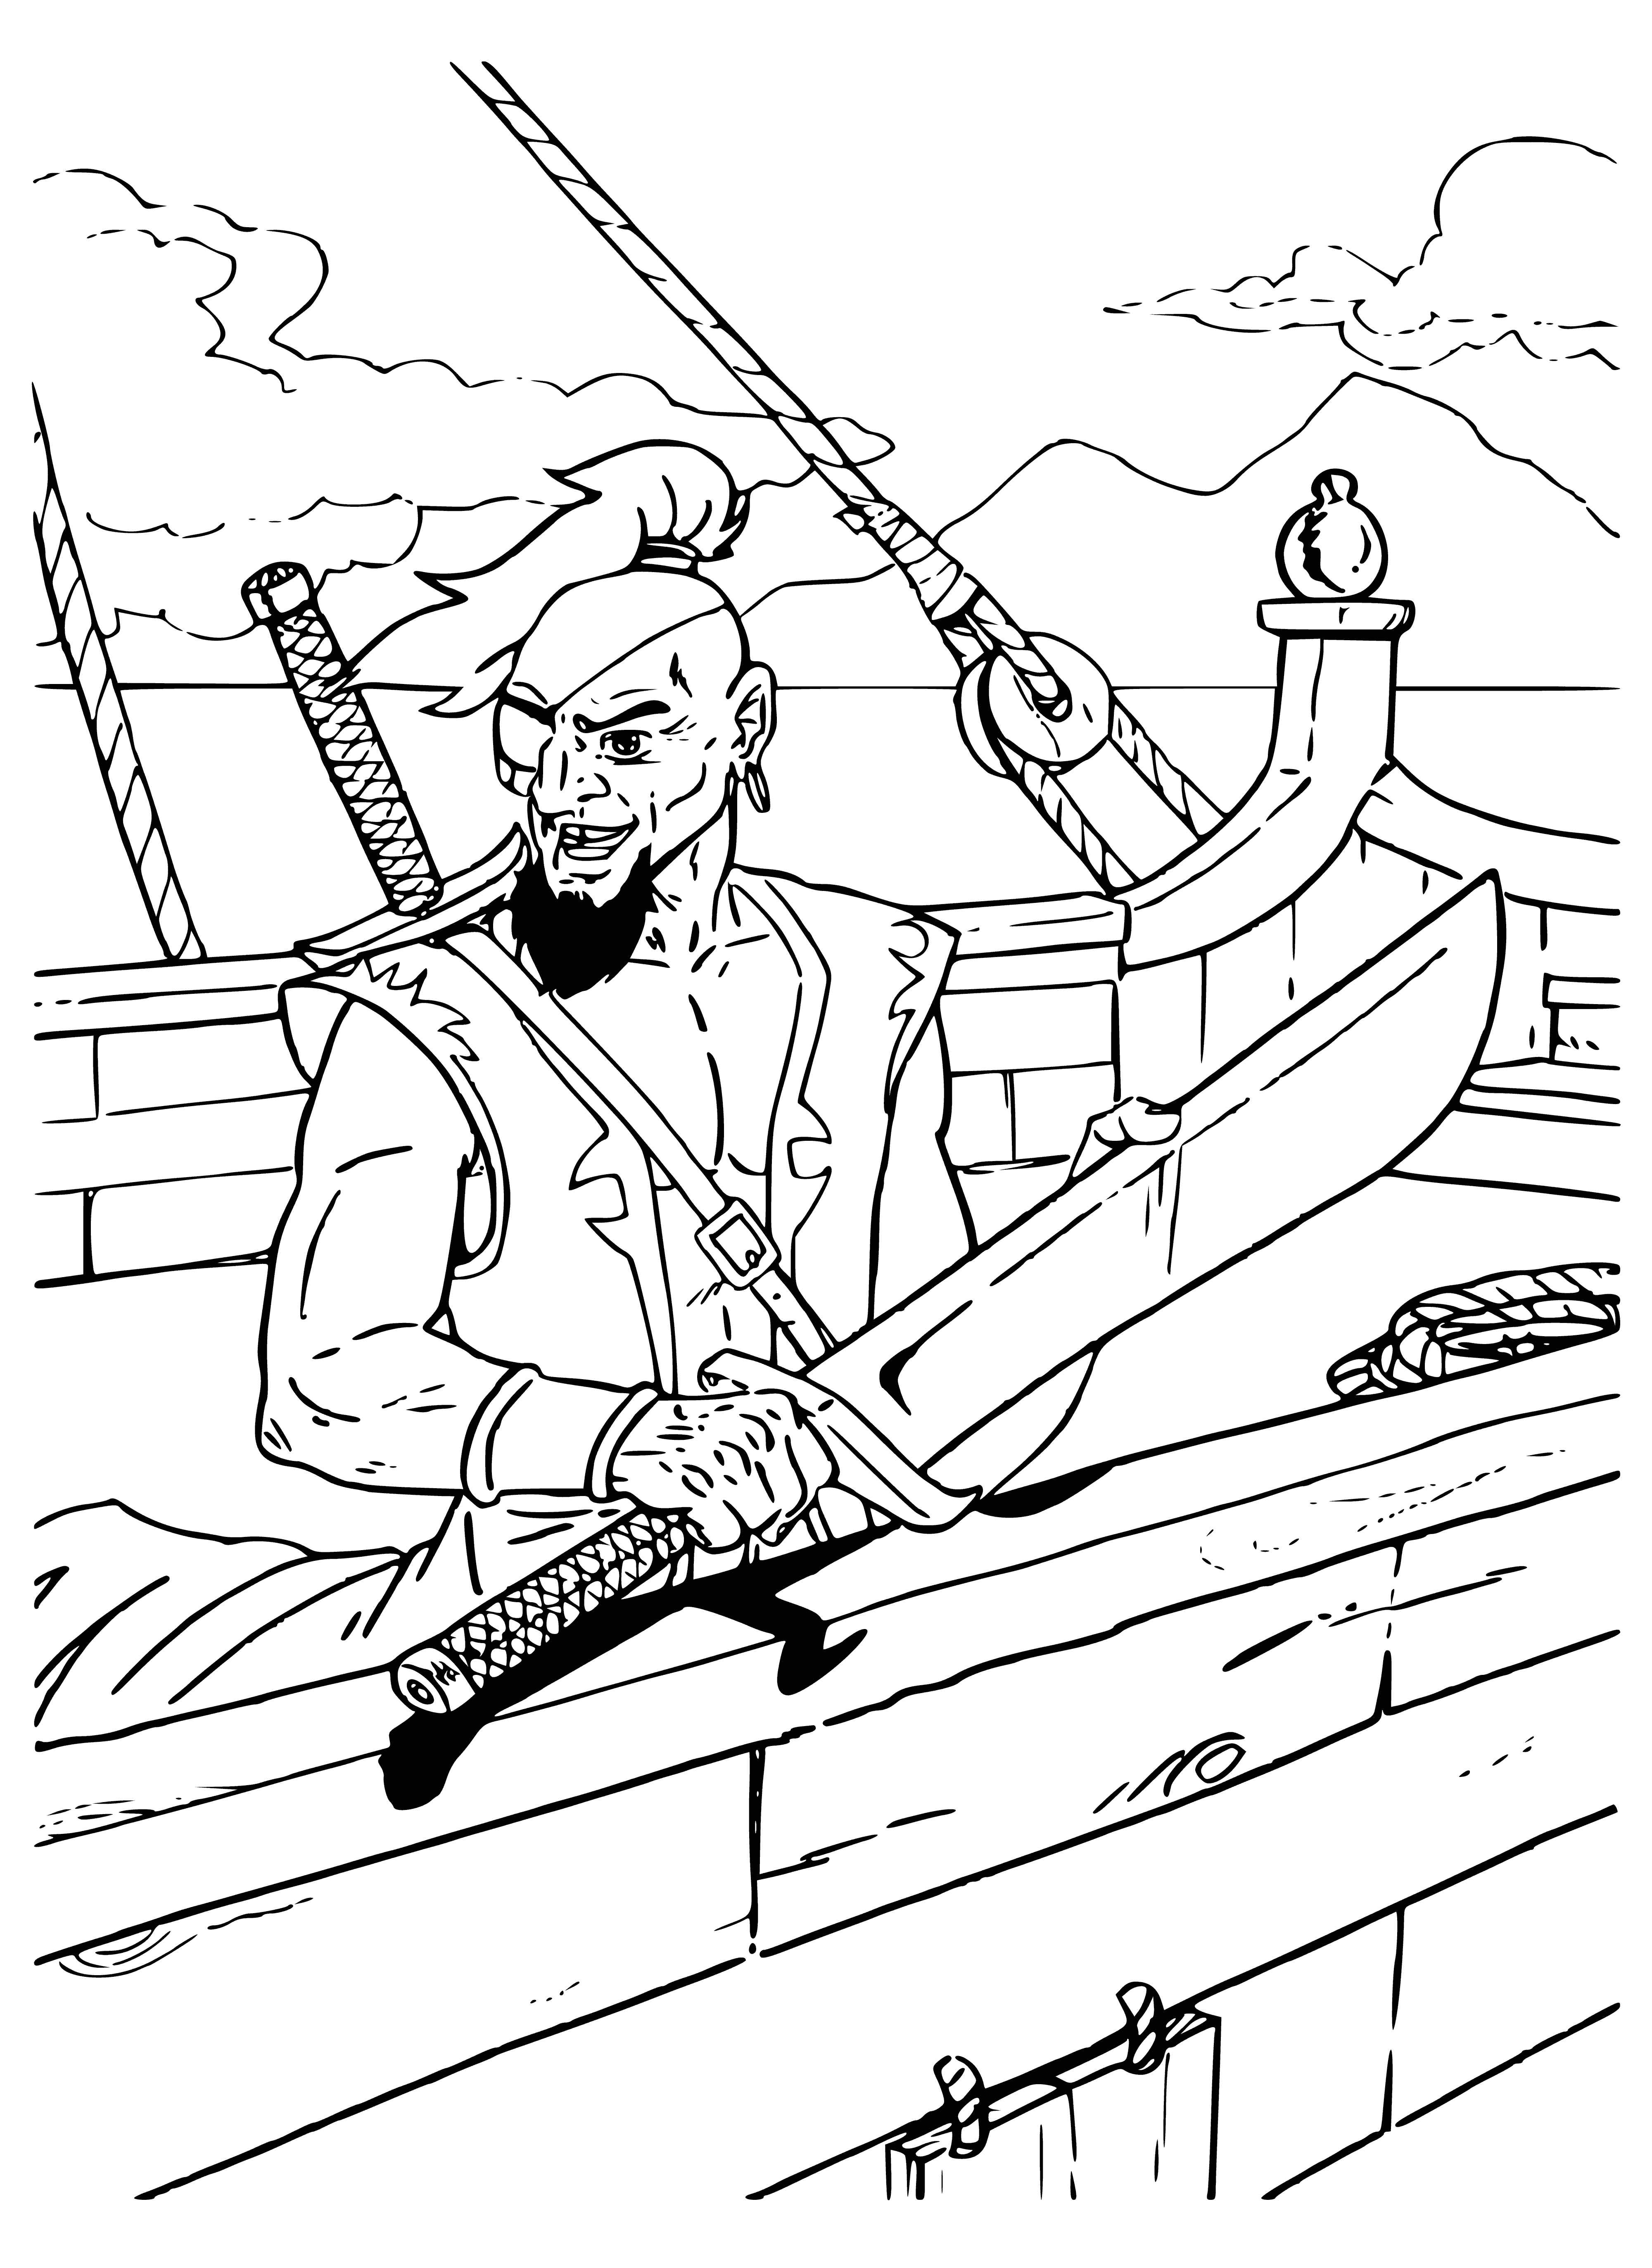 coloring page: Group of pirates on dock dressed in traditional pirate costumes, each with their own accessory: hat, eye patch, peg leg, scar. One holds telescope, another holds flag of skull & bones; large ship in background. #piracylife